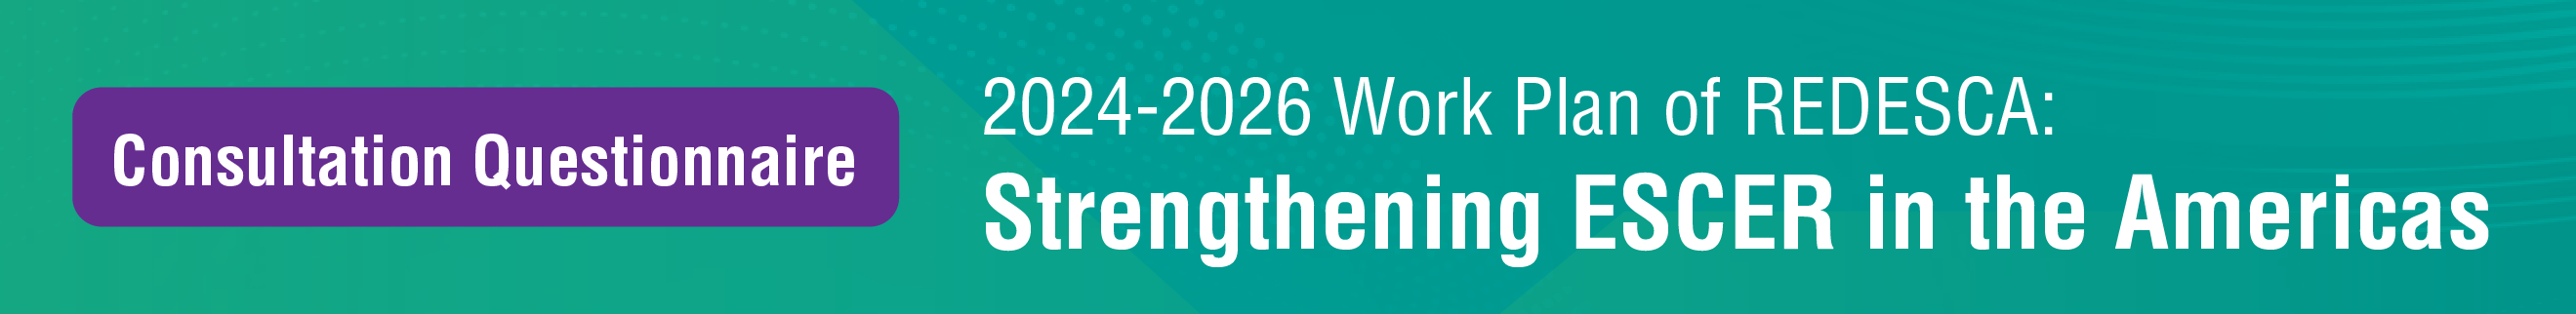 Work Plan 2024 - 2026 of REDESCA: Strengthening ESCERs in the Americas